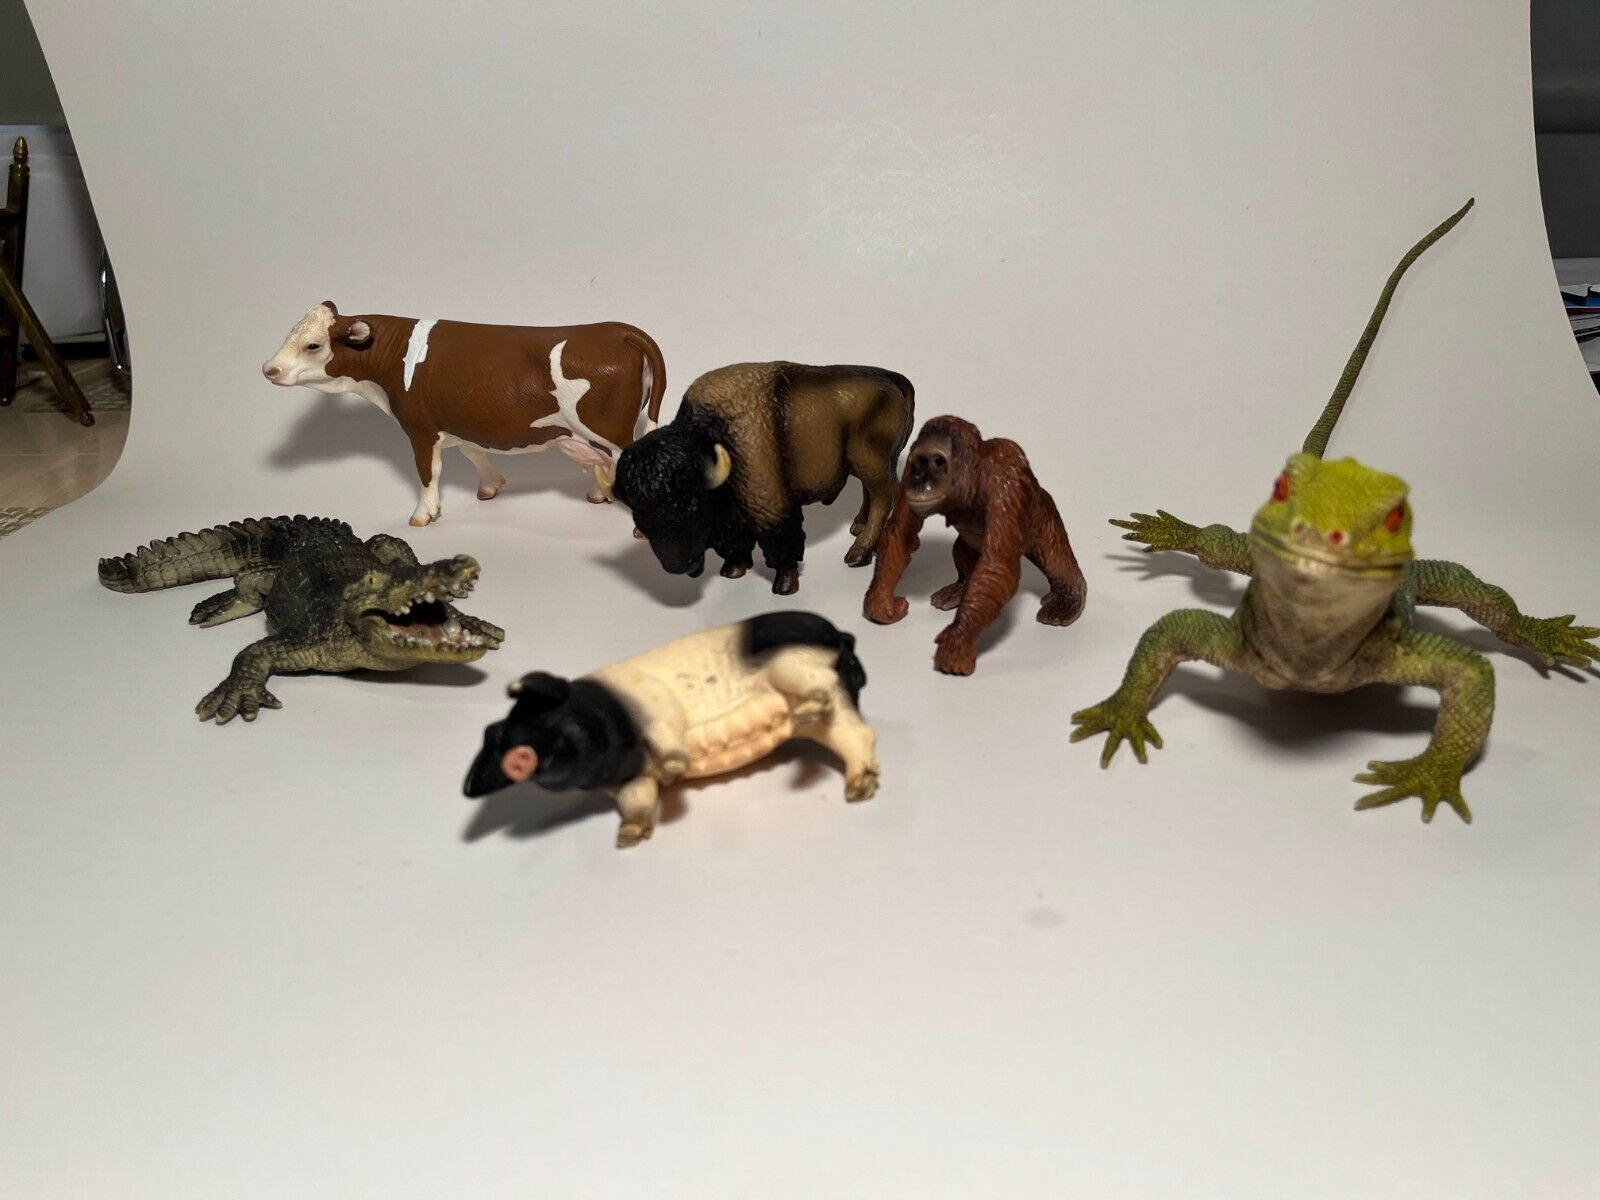 Schleich Germany, TOYSMITH High Quality Realistic Artwork Animals Collection Schleich Germany, TOYSMITH Schleich Germany - фотография #11